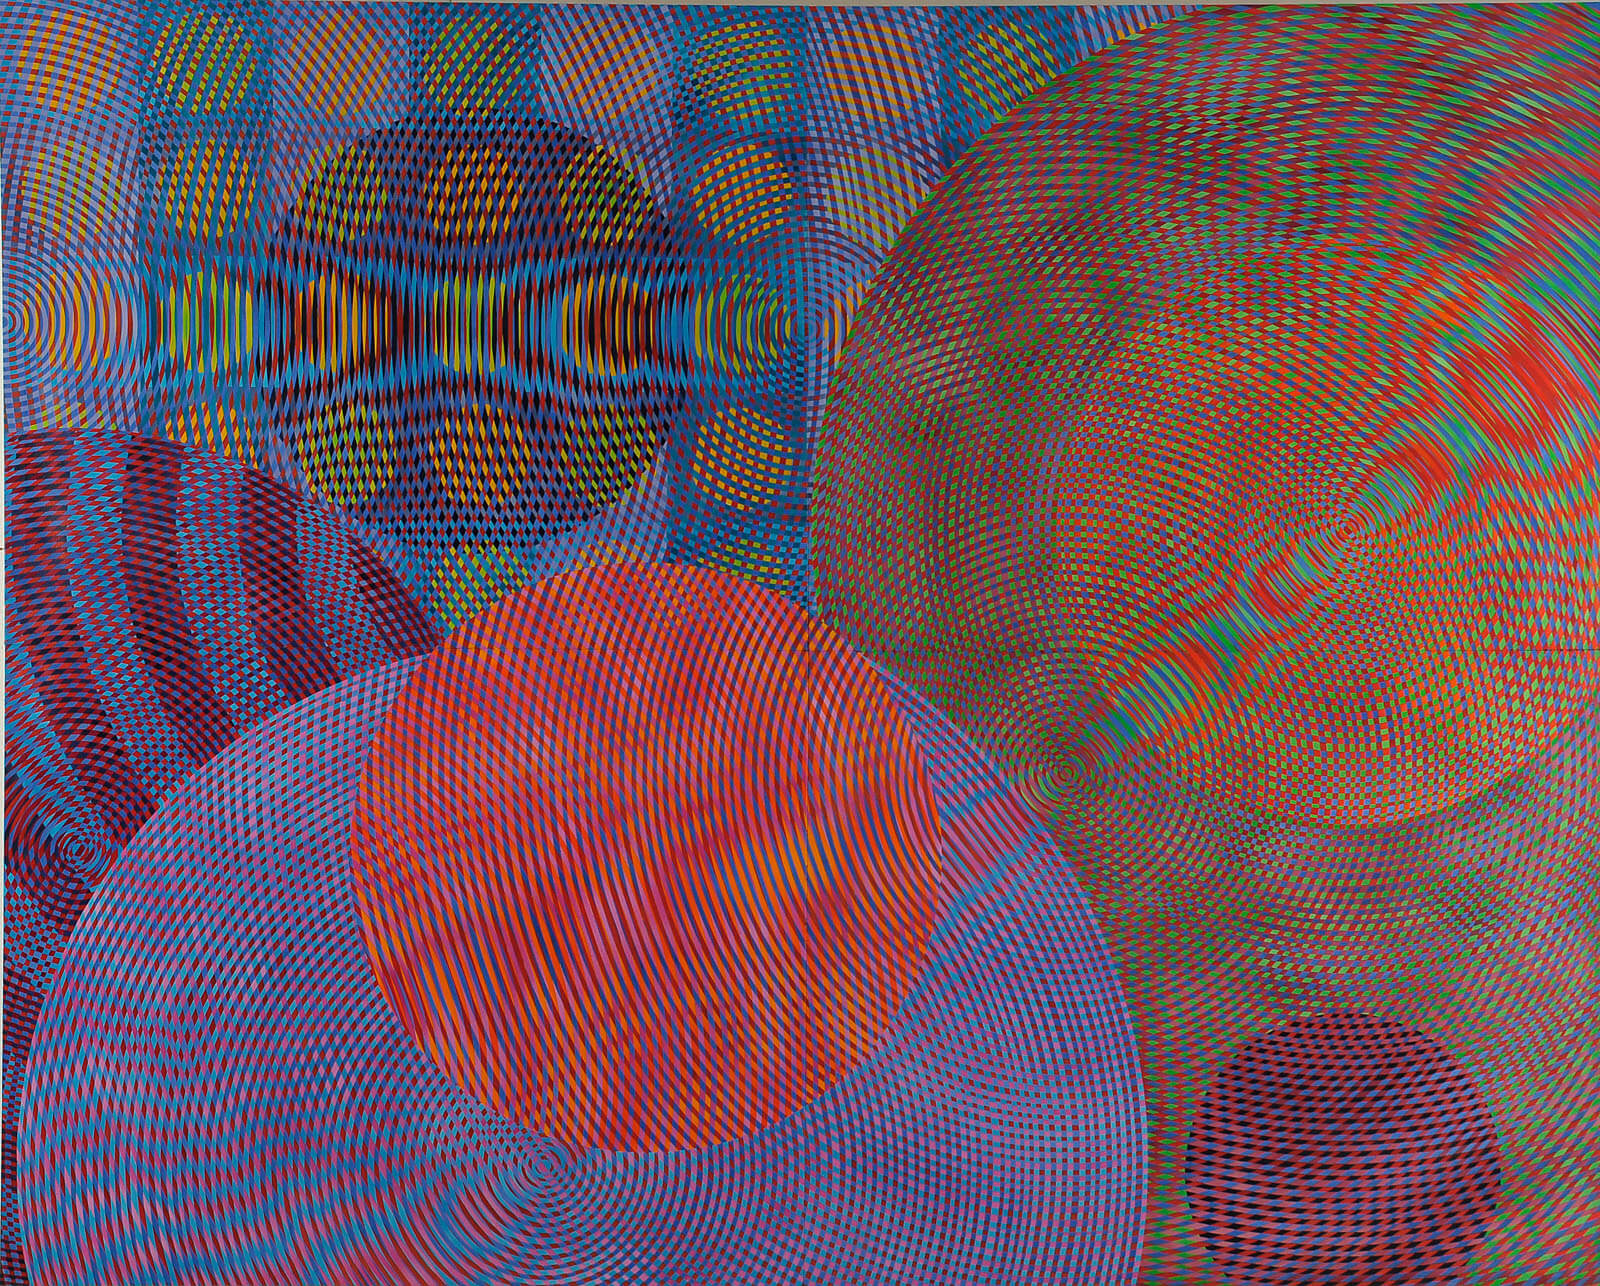 sonic-network-no.-7.-oil-and-acrylic-on-canvas-244x305cm-2010